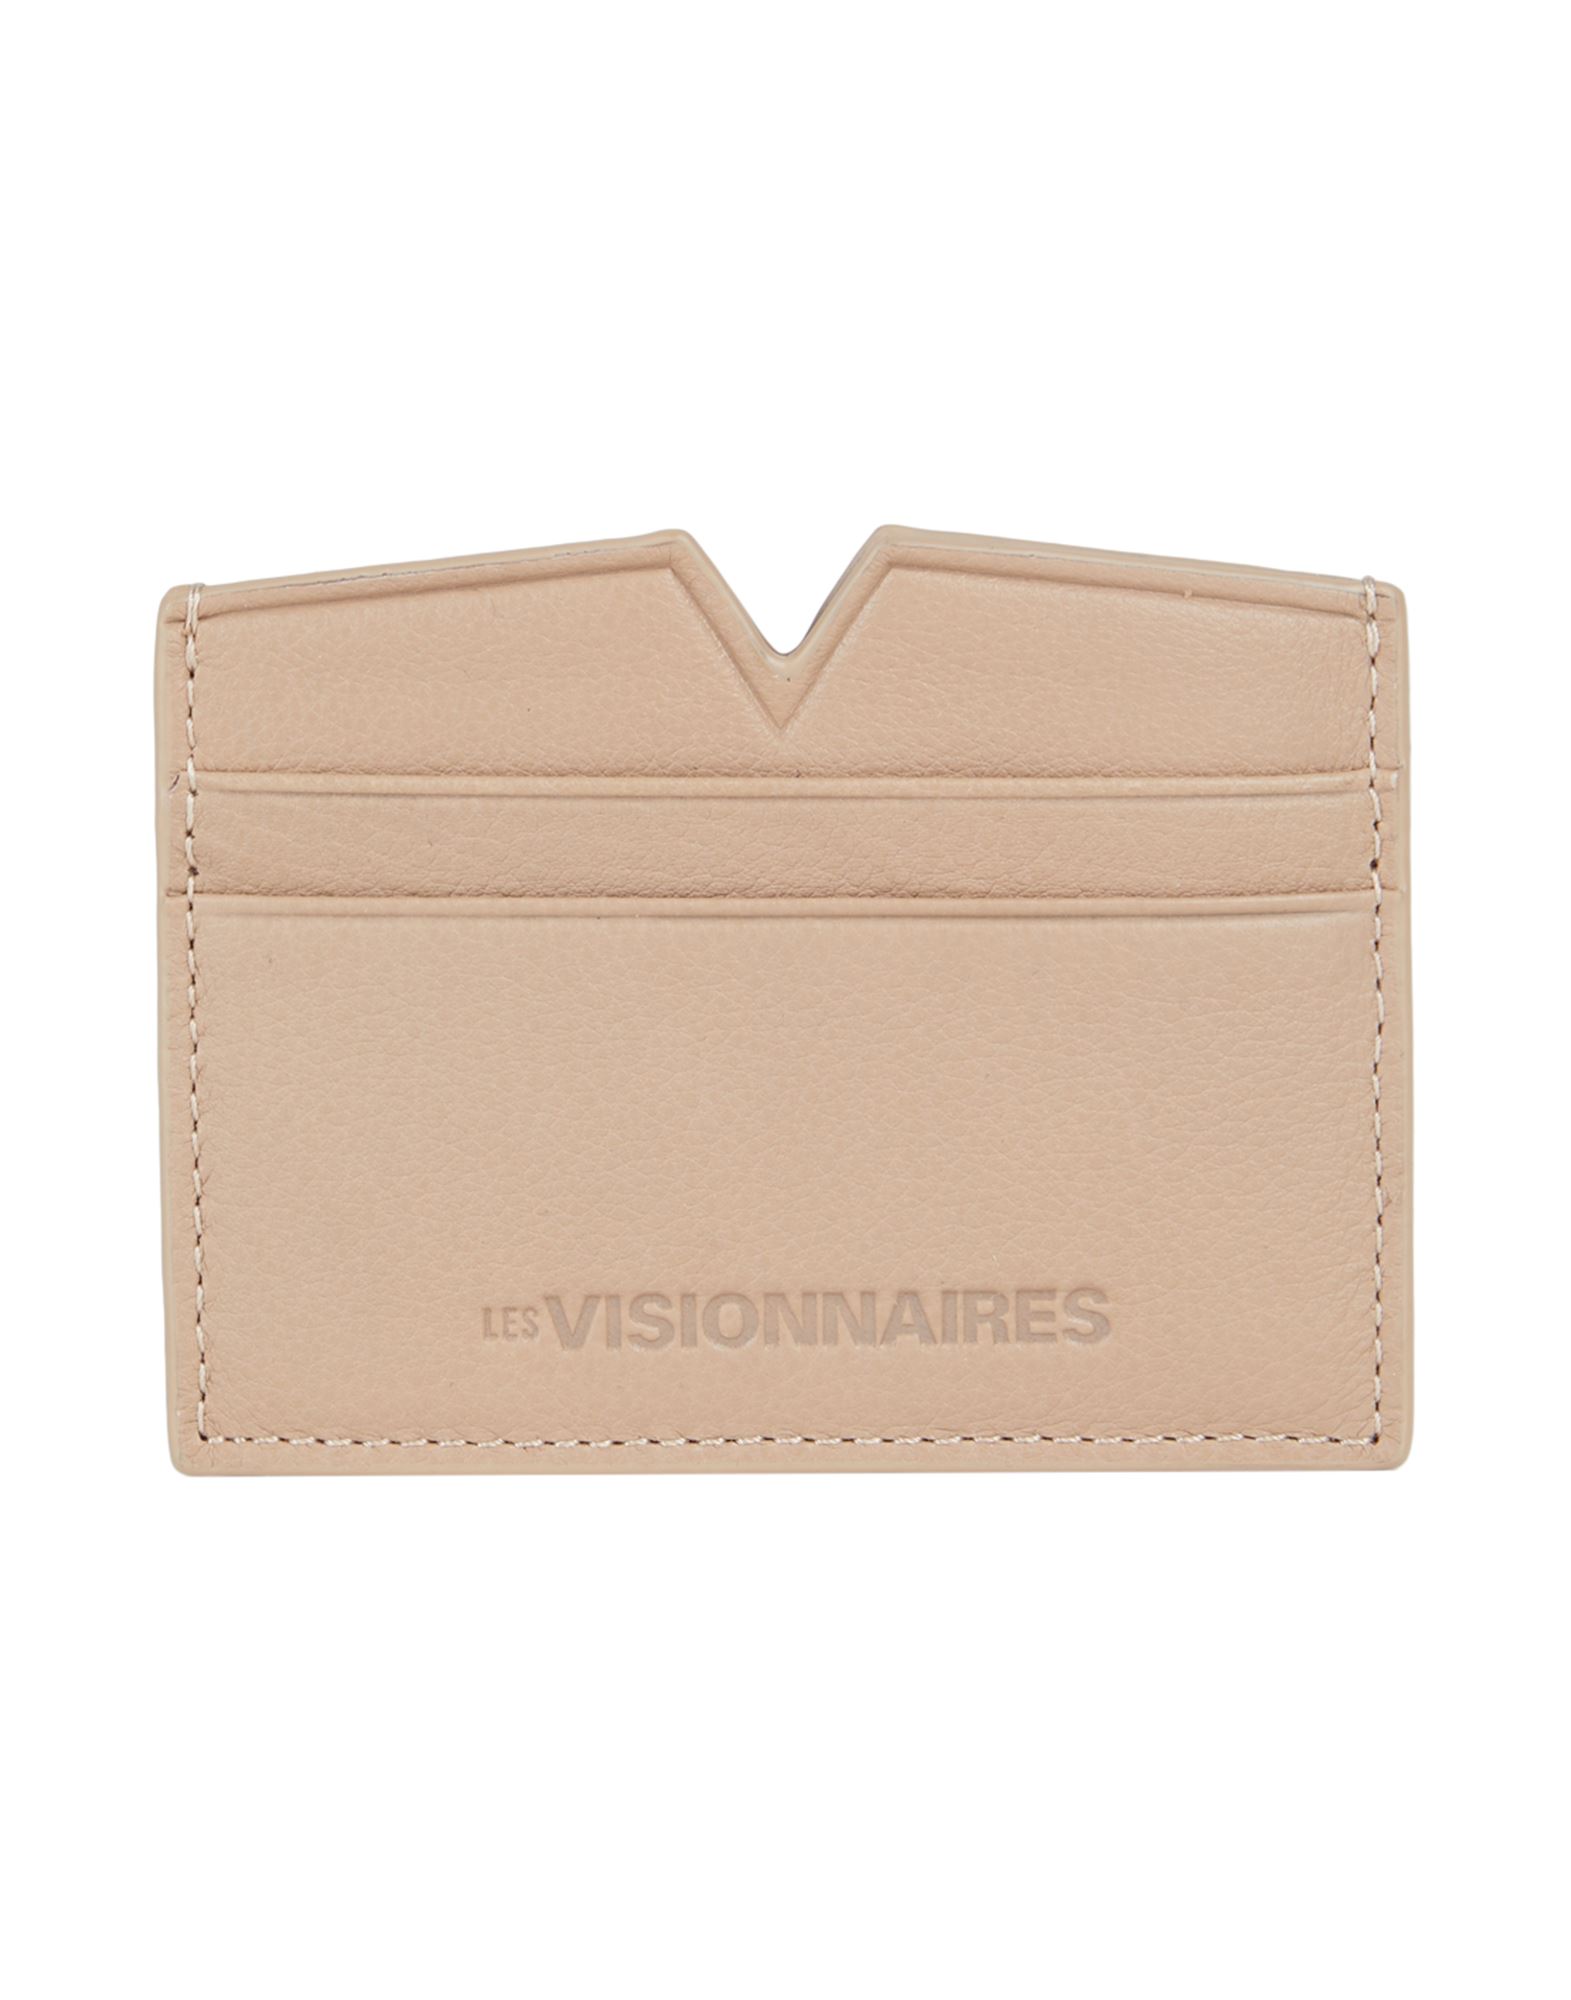 Les Visionnaires Document Holders In Grey